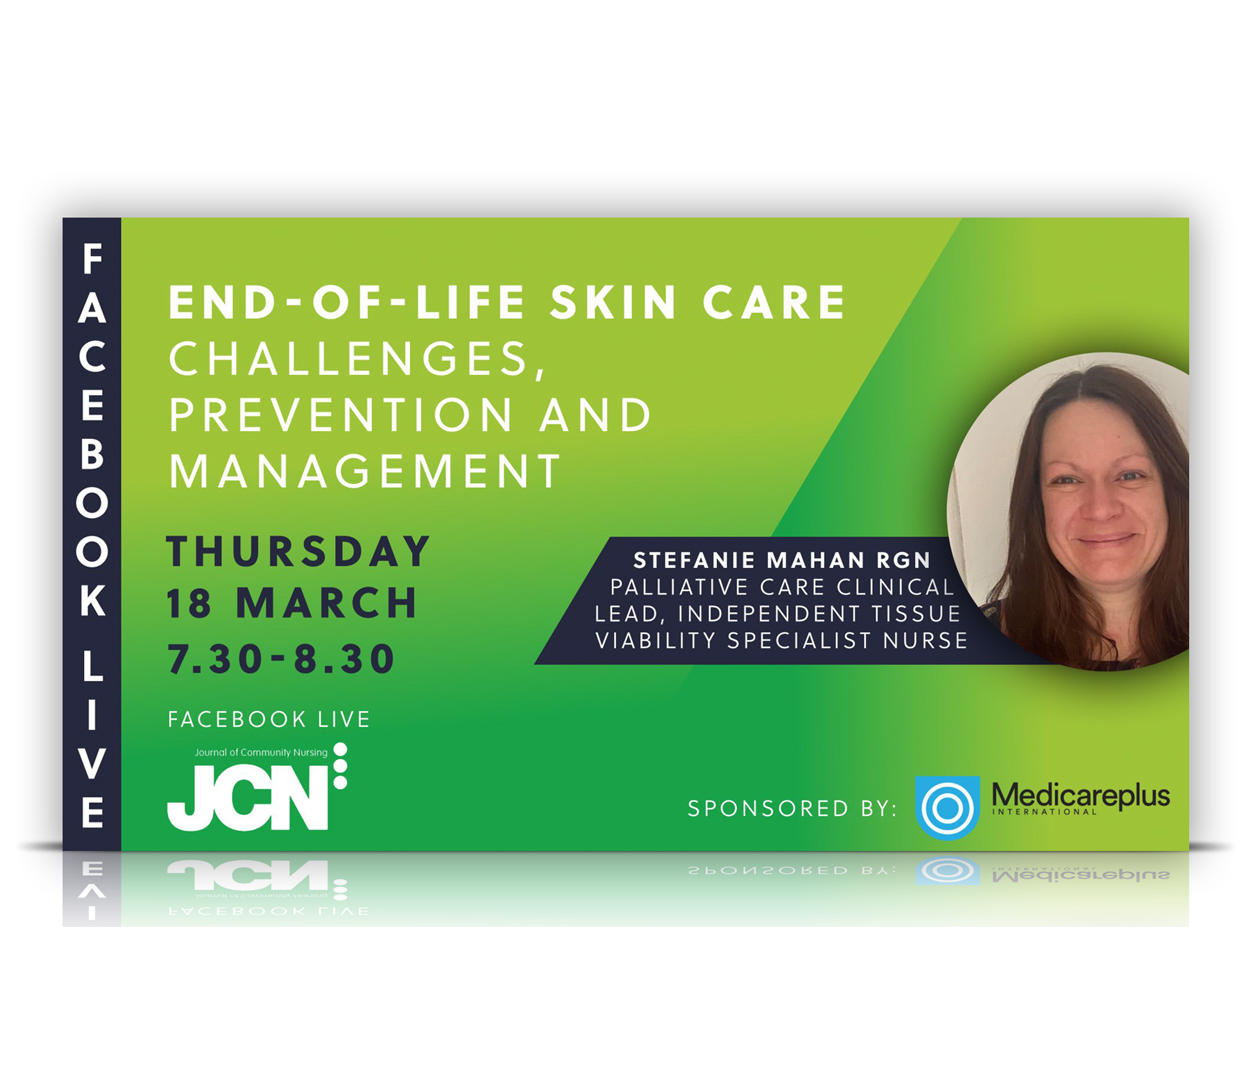 Facebook Live: End-Of-Life Skin Care - Challenges, Prevention And Management